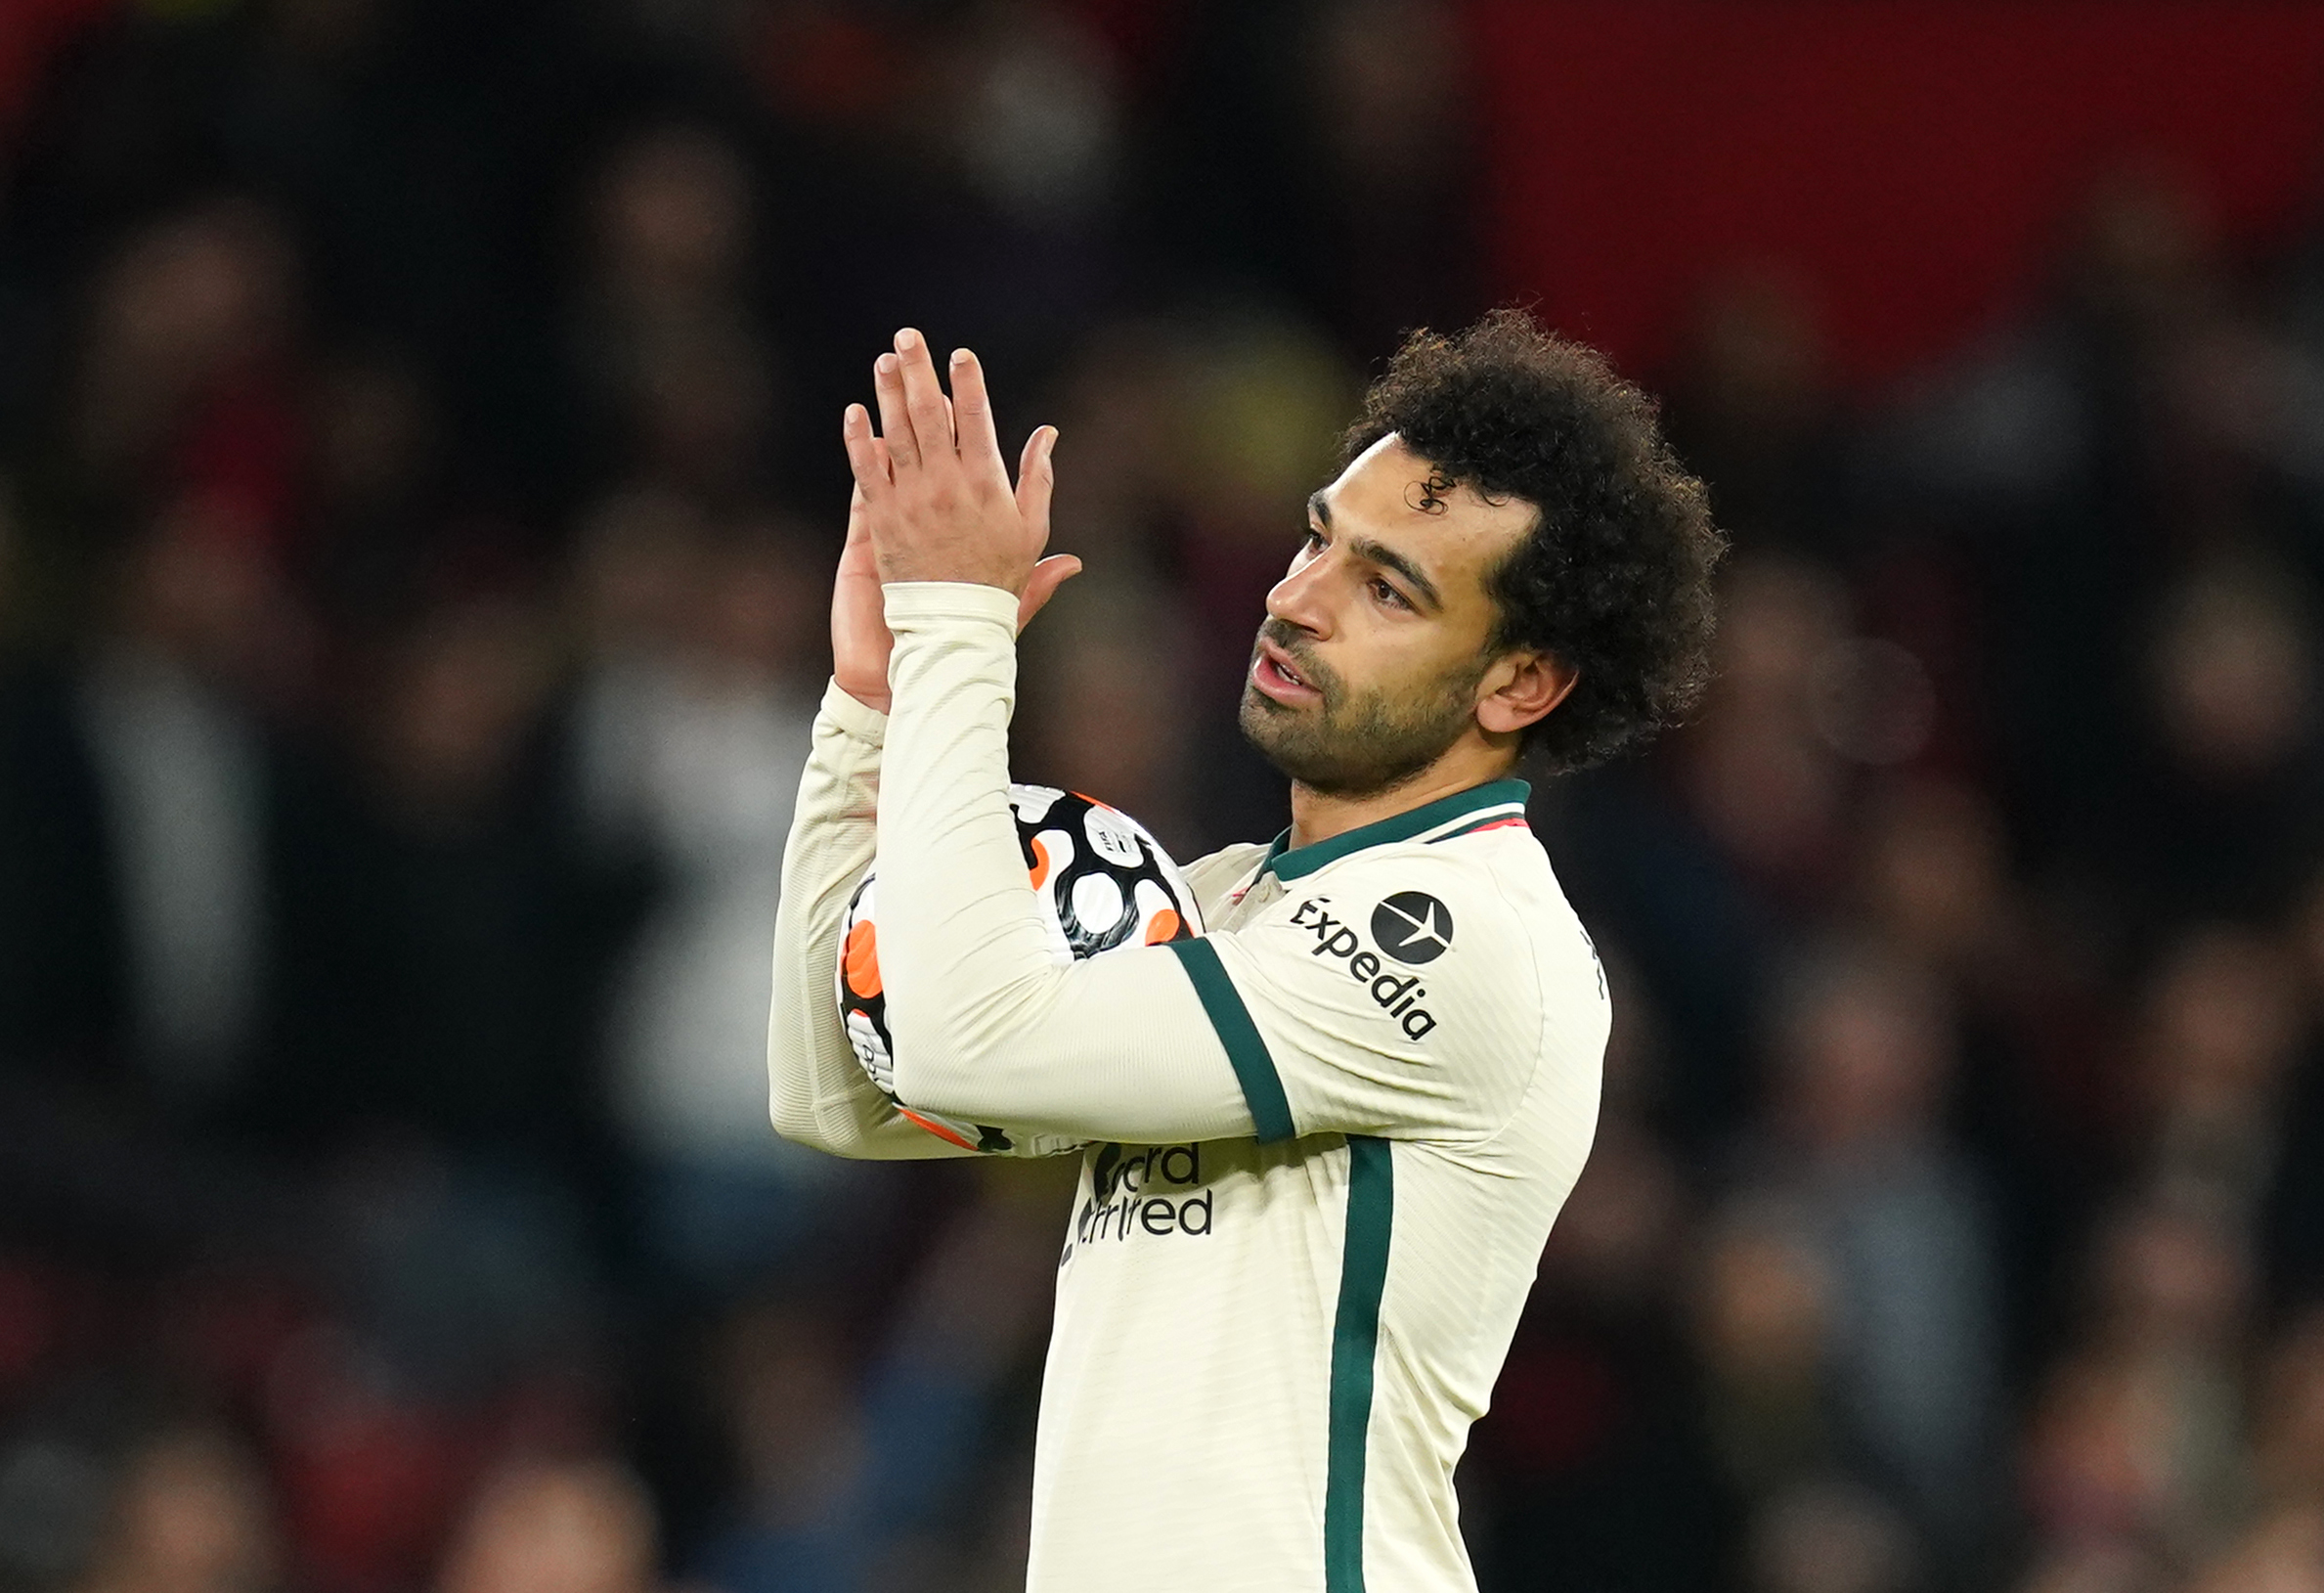 Manchester United is always special game for everyone in Liverpool and over world, claims Mohamed Salah